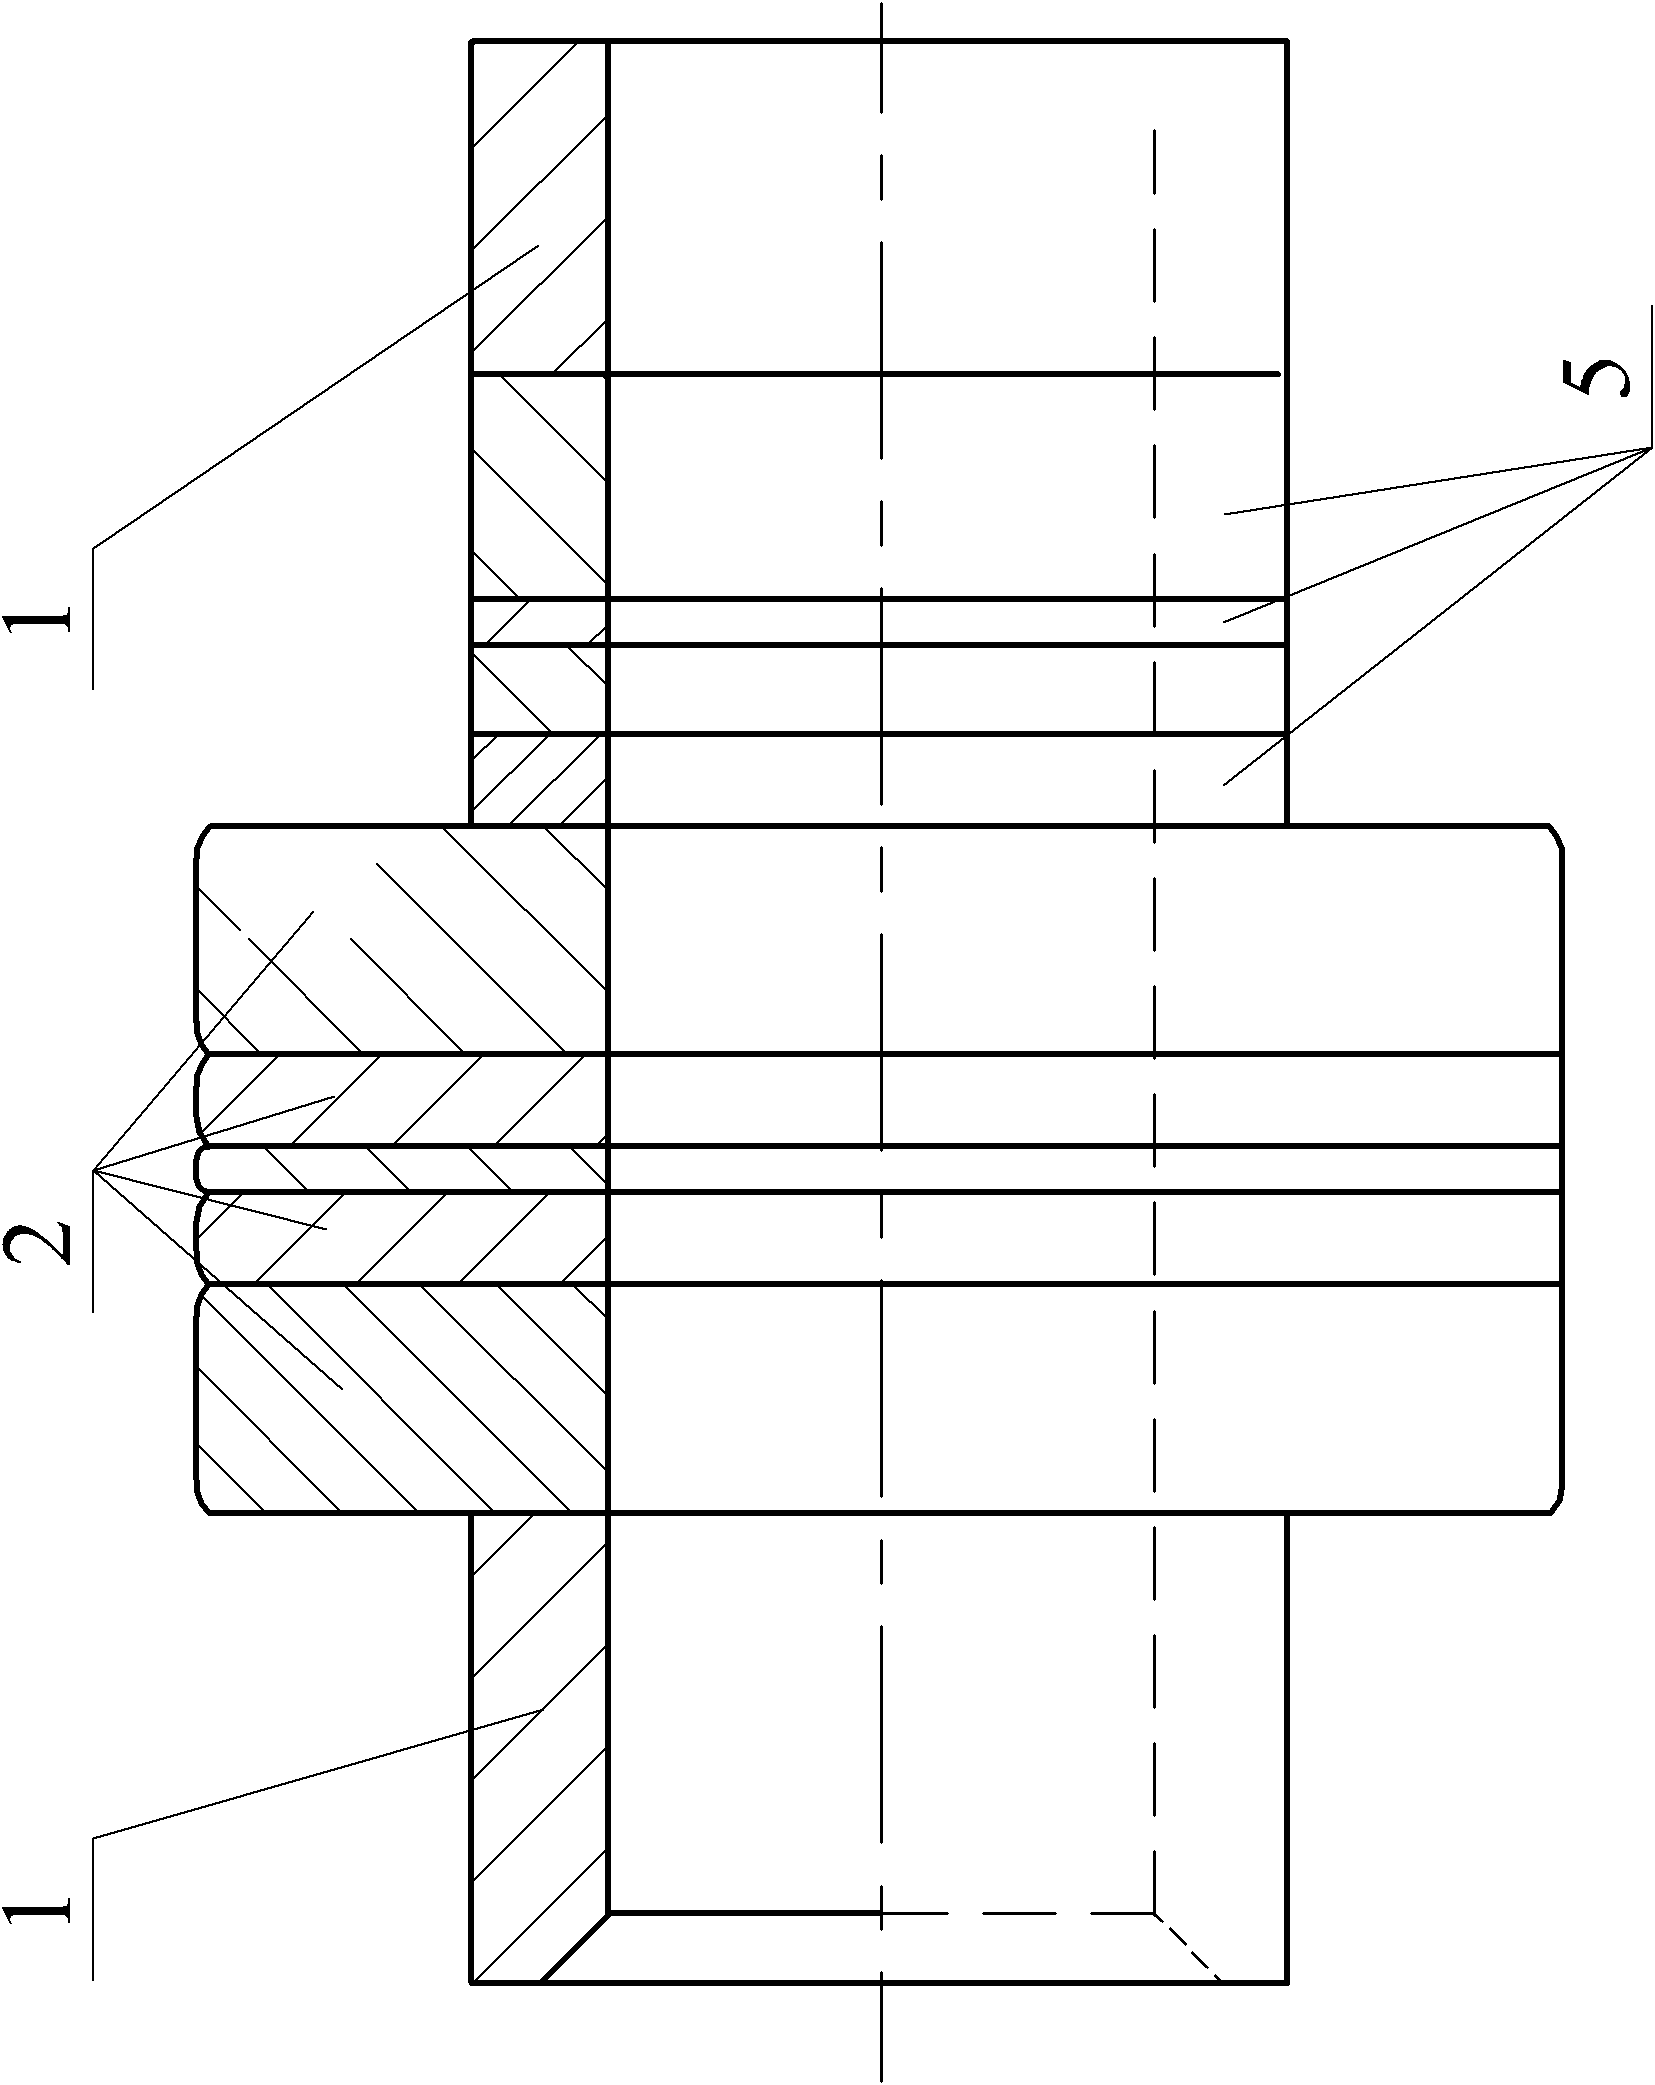 Narrow-gap adjustable device and cosmetic welding adjustable device for improving bearing capacity of butt joints